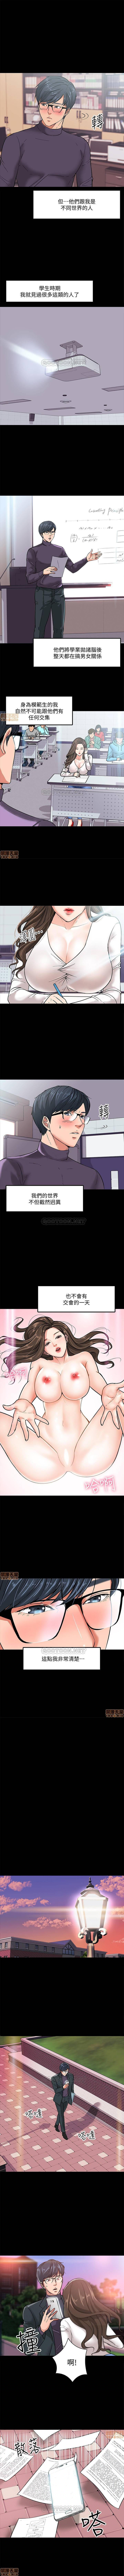 Livesex PROFESSOR, ARE YOU JUST GOING TO LOOK AT ME? | DESIRE SWAMP | 教授，你還等什麼? Ch. 2 [Chinese] Manhwa Audition - Page 6